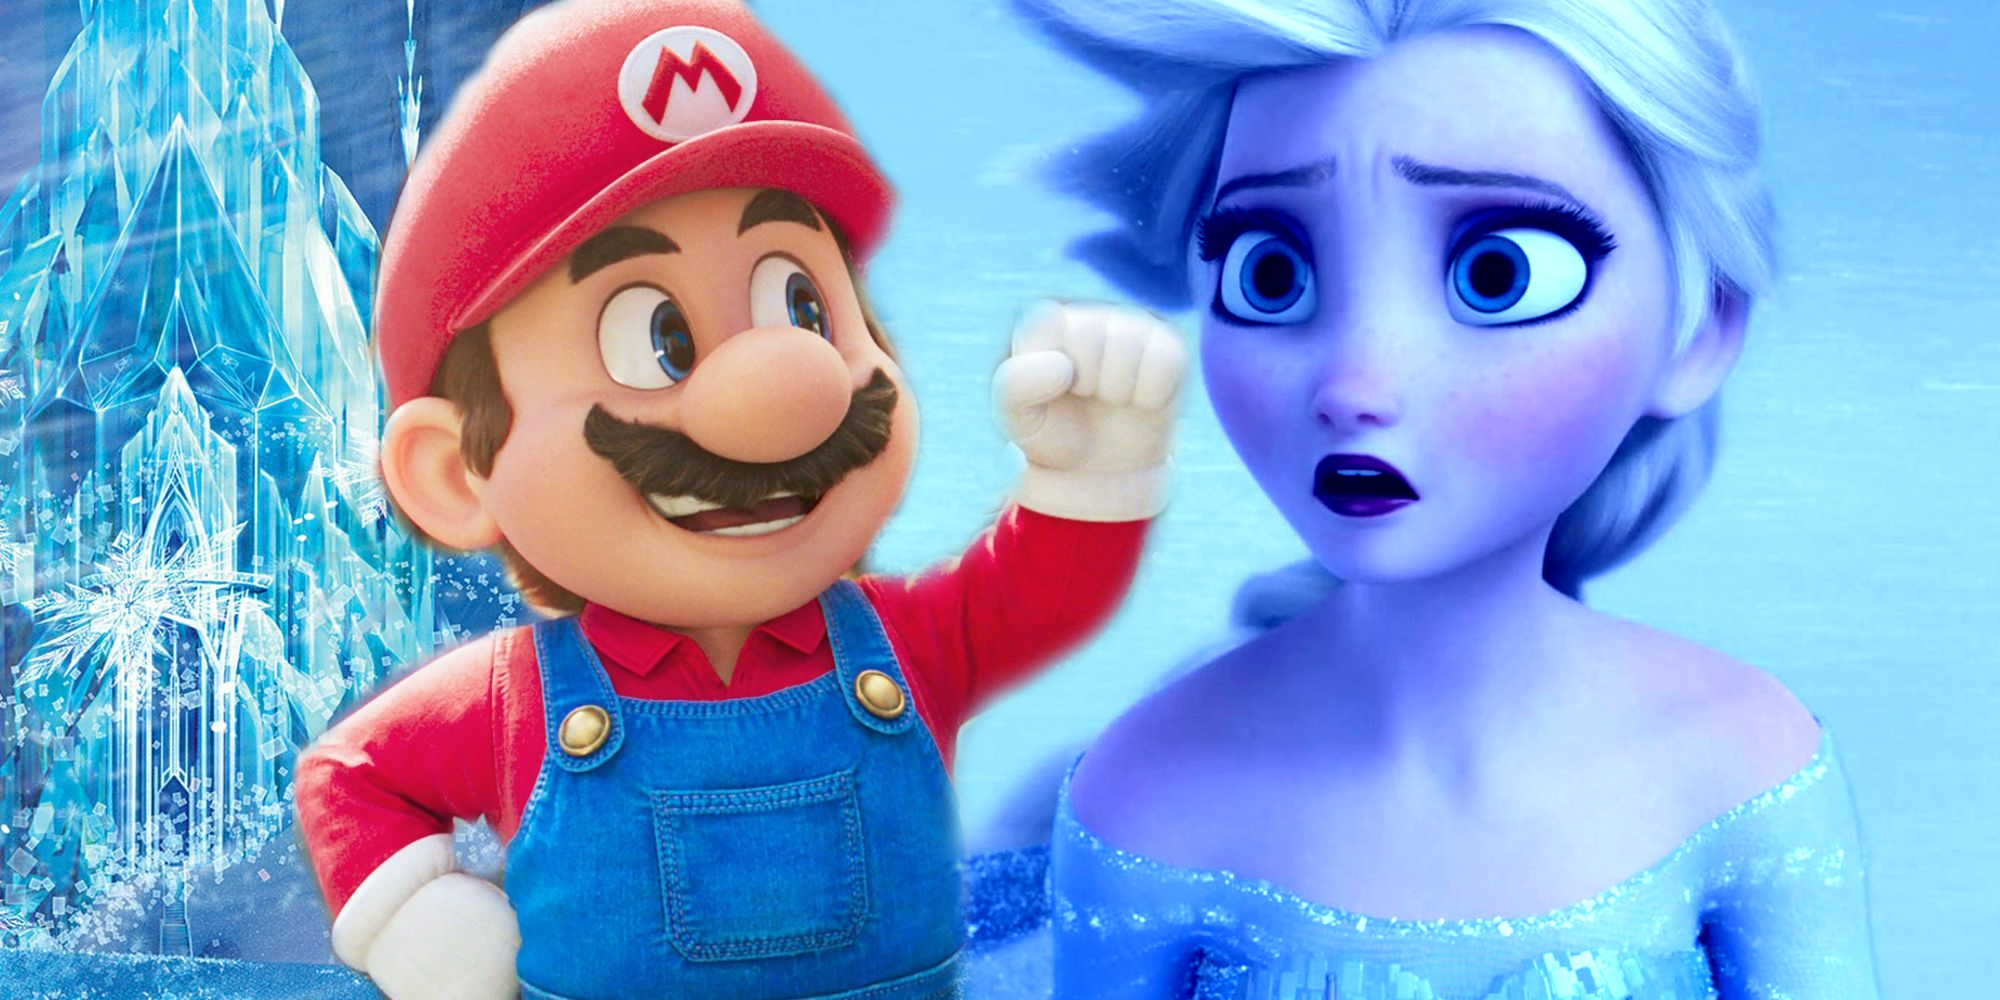 Blended image of Elsa shocked in Frozen and Mario with his fist up in The Super Mario Bros Movie